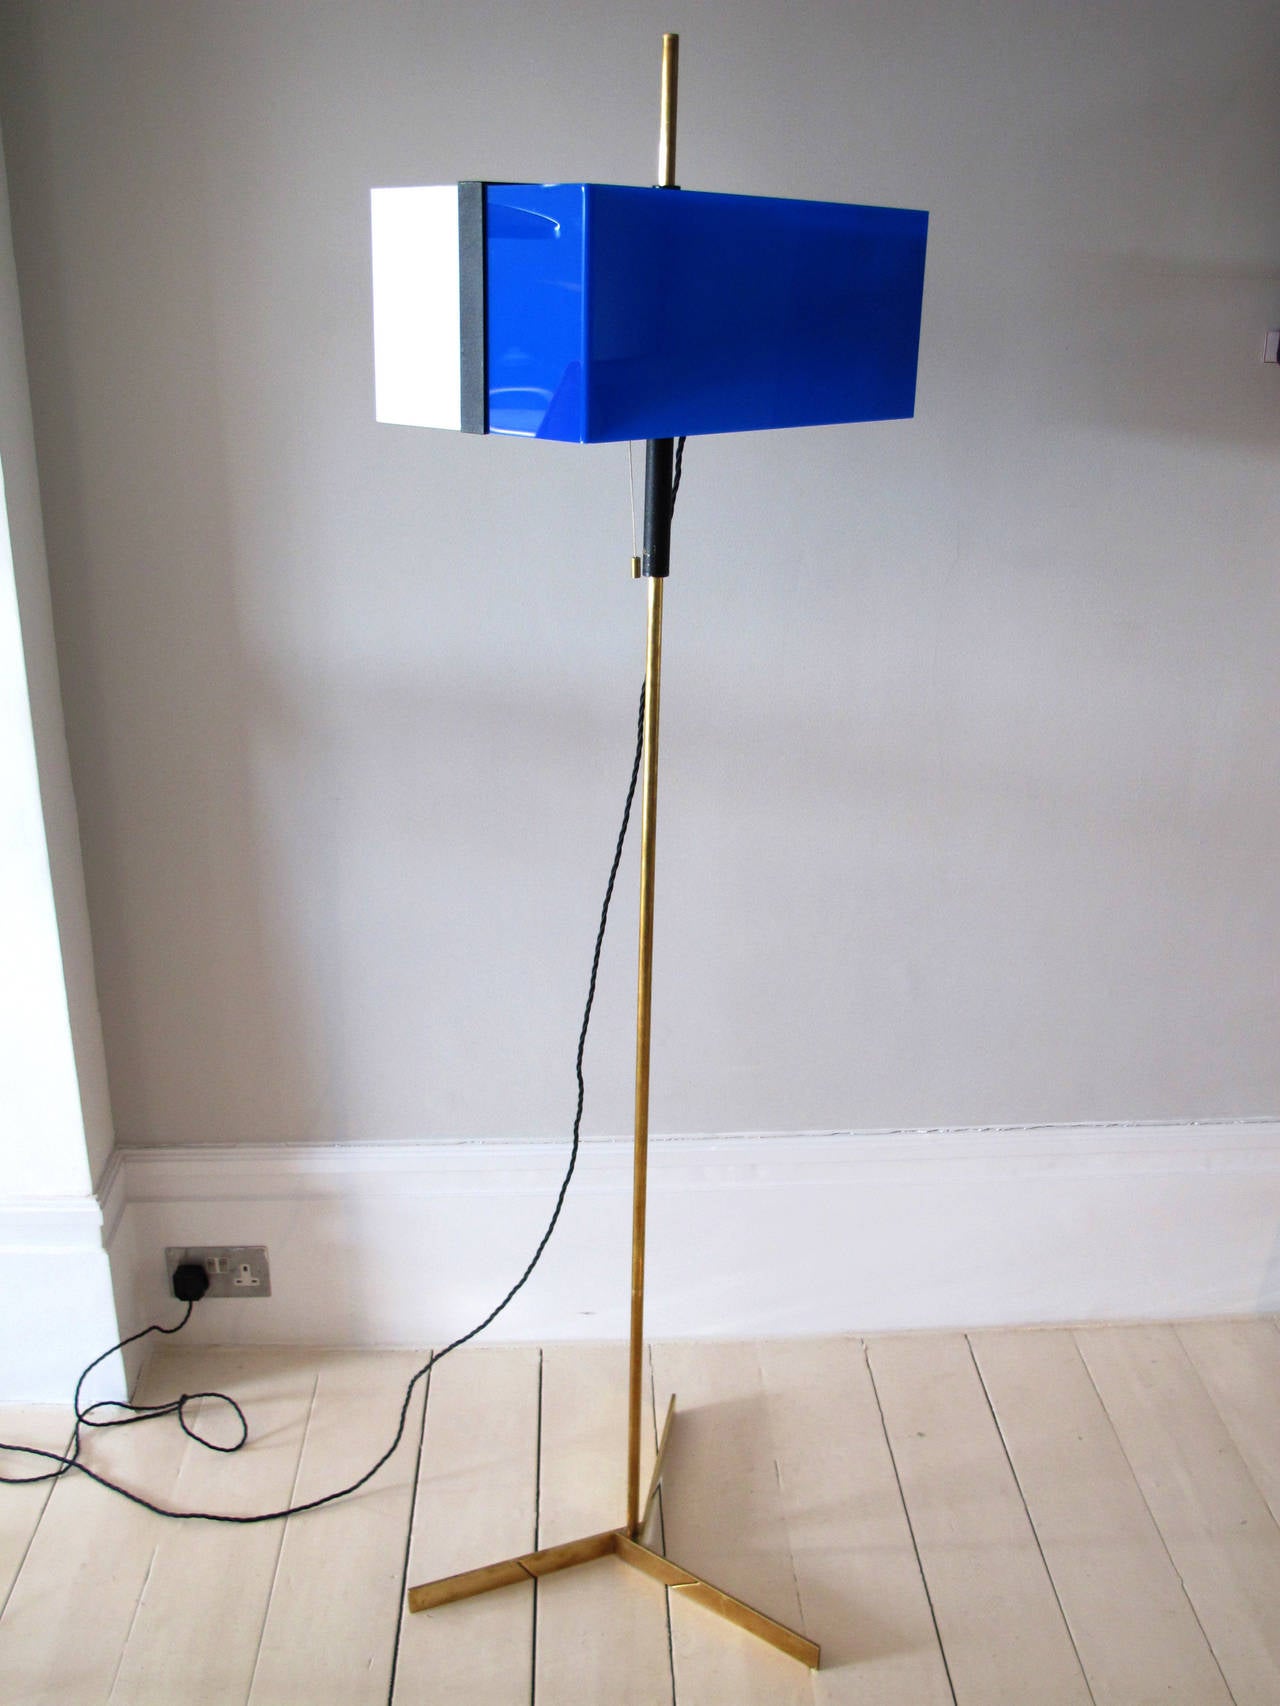 Adjustable standing lamp in brass and perspex.
Tito Agnoli for Oluce.
circa 1955,
Italy.